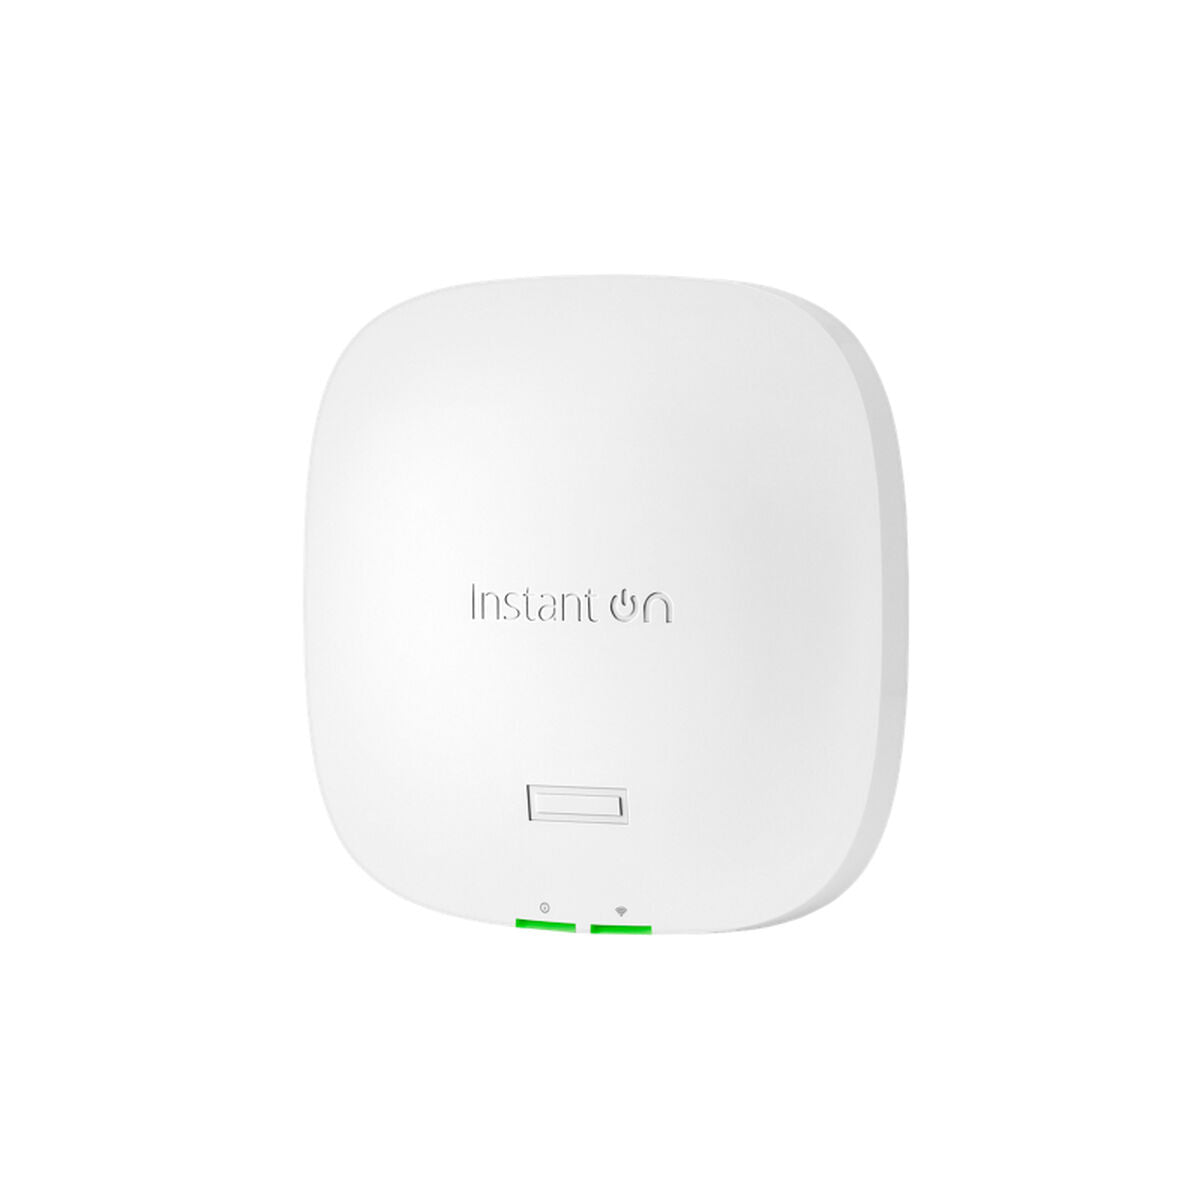 Access point HPE S1T18A White, HPE, Computing, Network devices, access-point-hpe-s1t18a-white, Brand_HPE, category-reference-2609, category-reference-2803, category-reference-2820, category-reference-t-19685, category-reference-t-19914, category-reference-t-21369, Condition_NEW, networks/wiring, Price_500 - 600, Teleworking, RiotNook